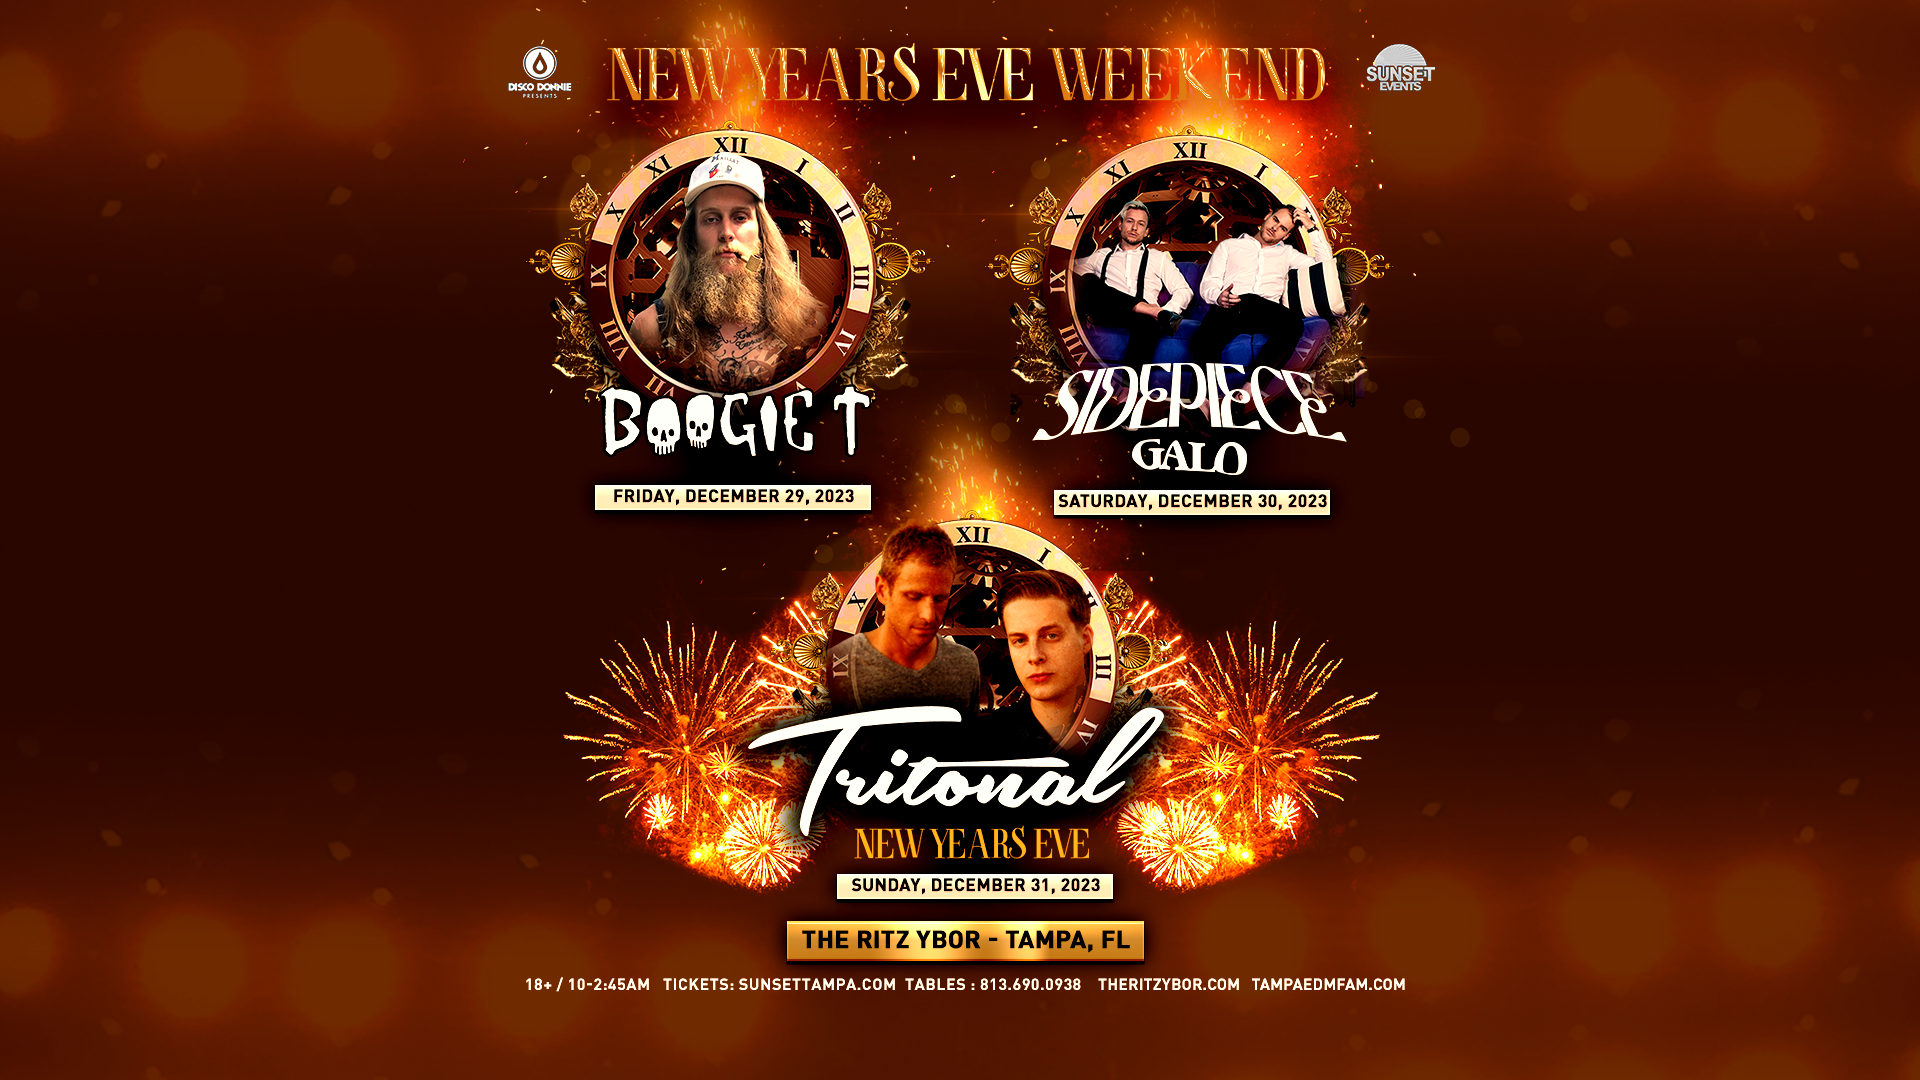 Celebrate New Years Eve Weekend 2023 in Tampa!